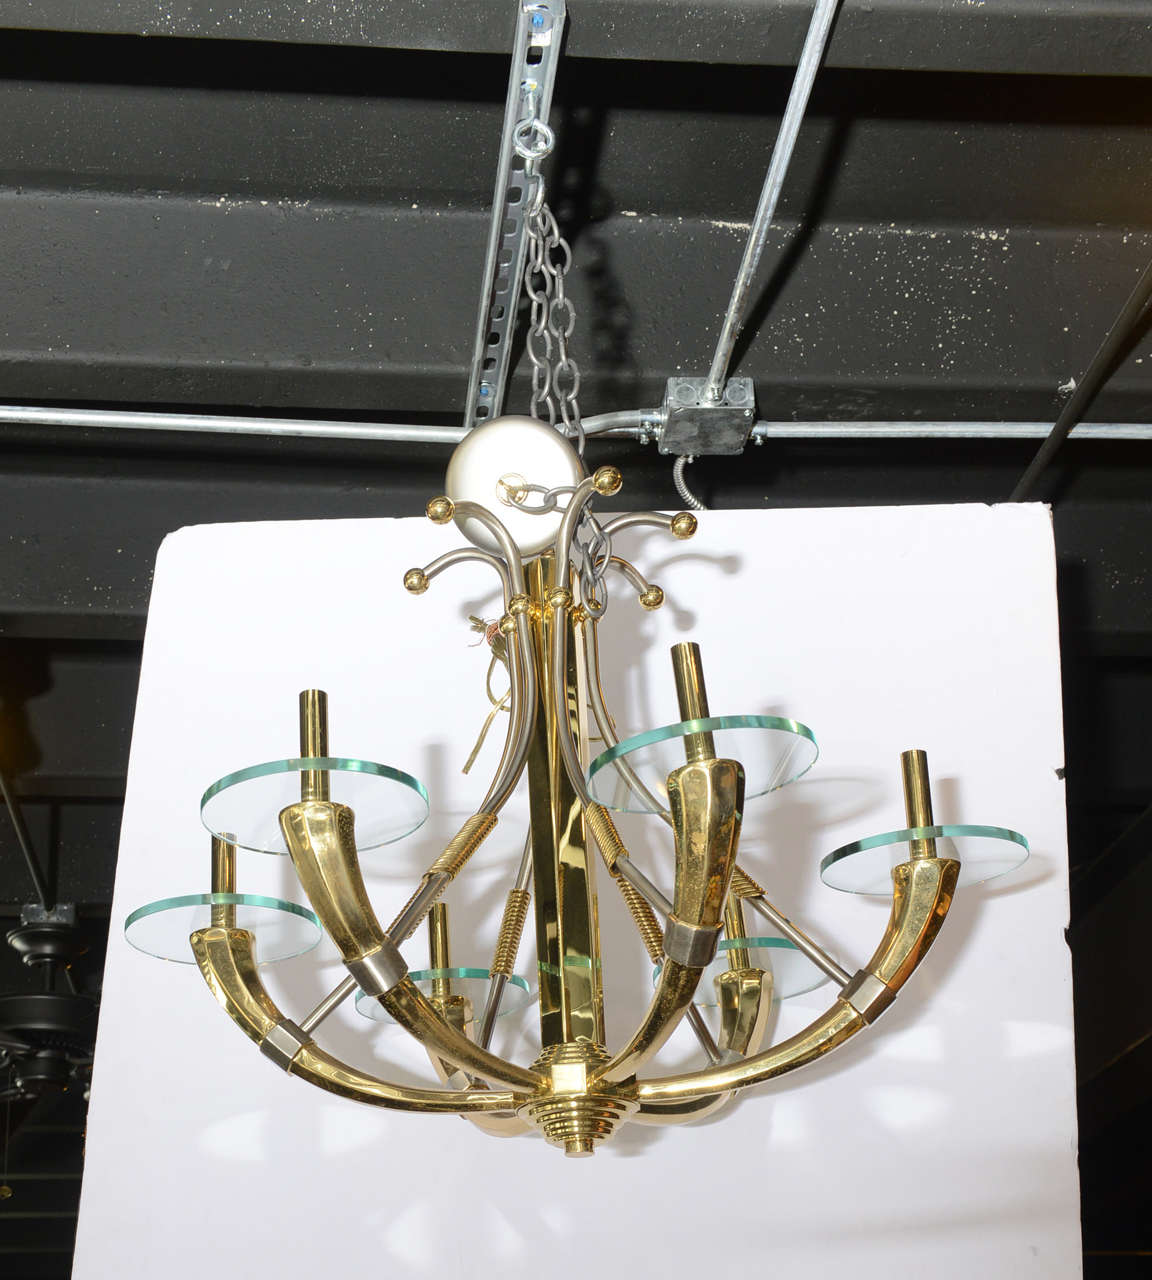 Striking modern brass and steel six-arm chandelier with glass bobeches.